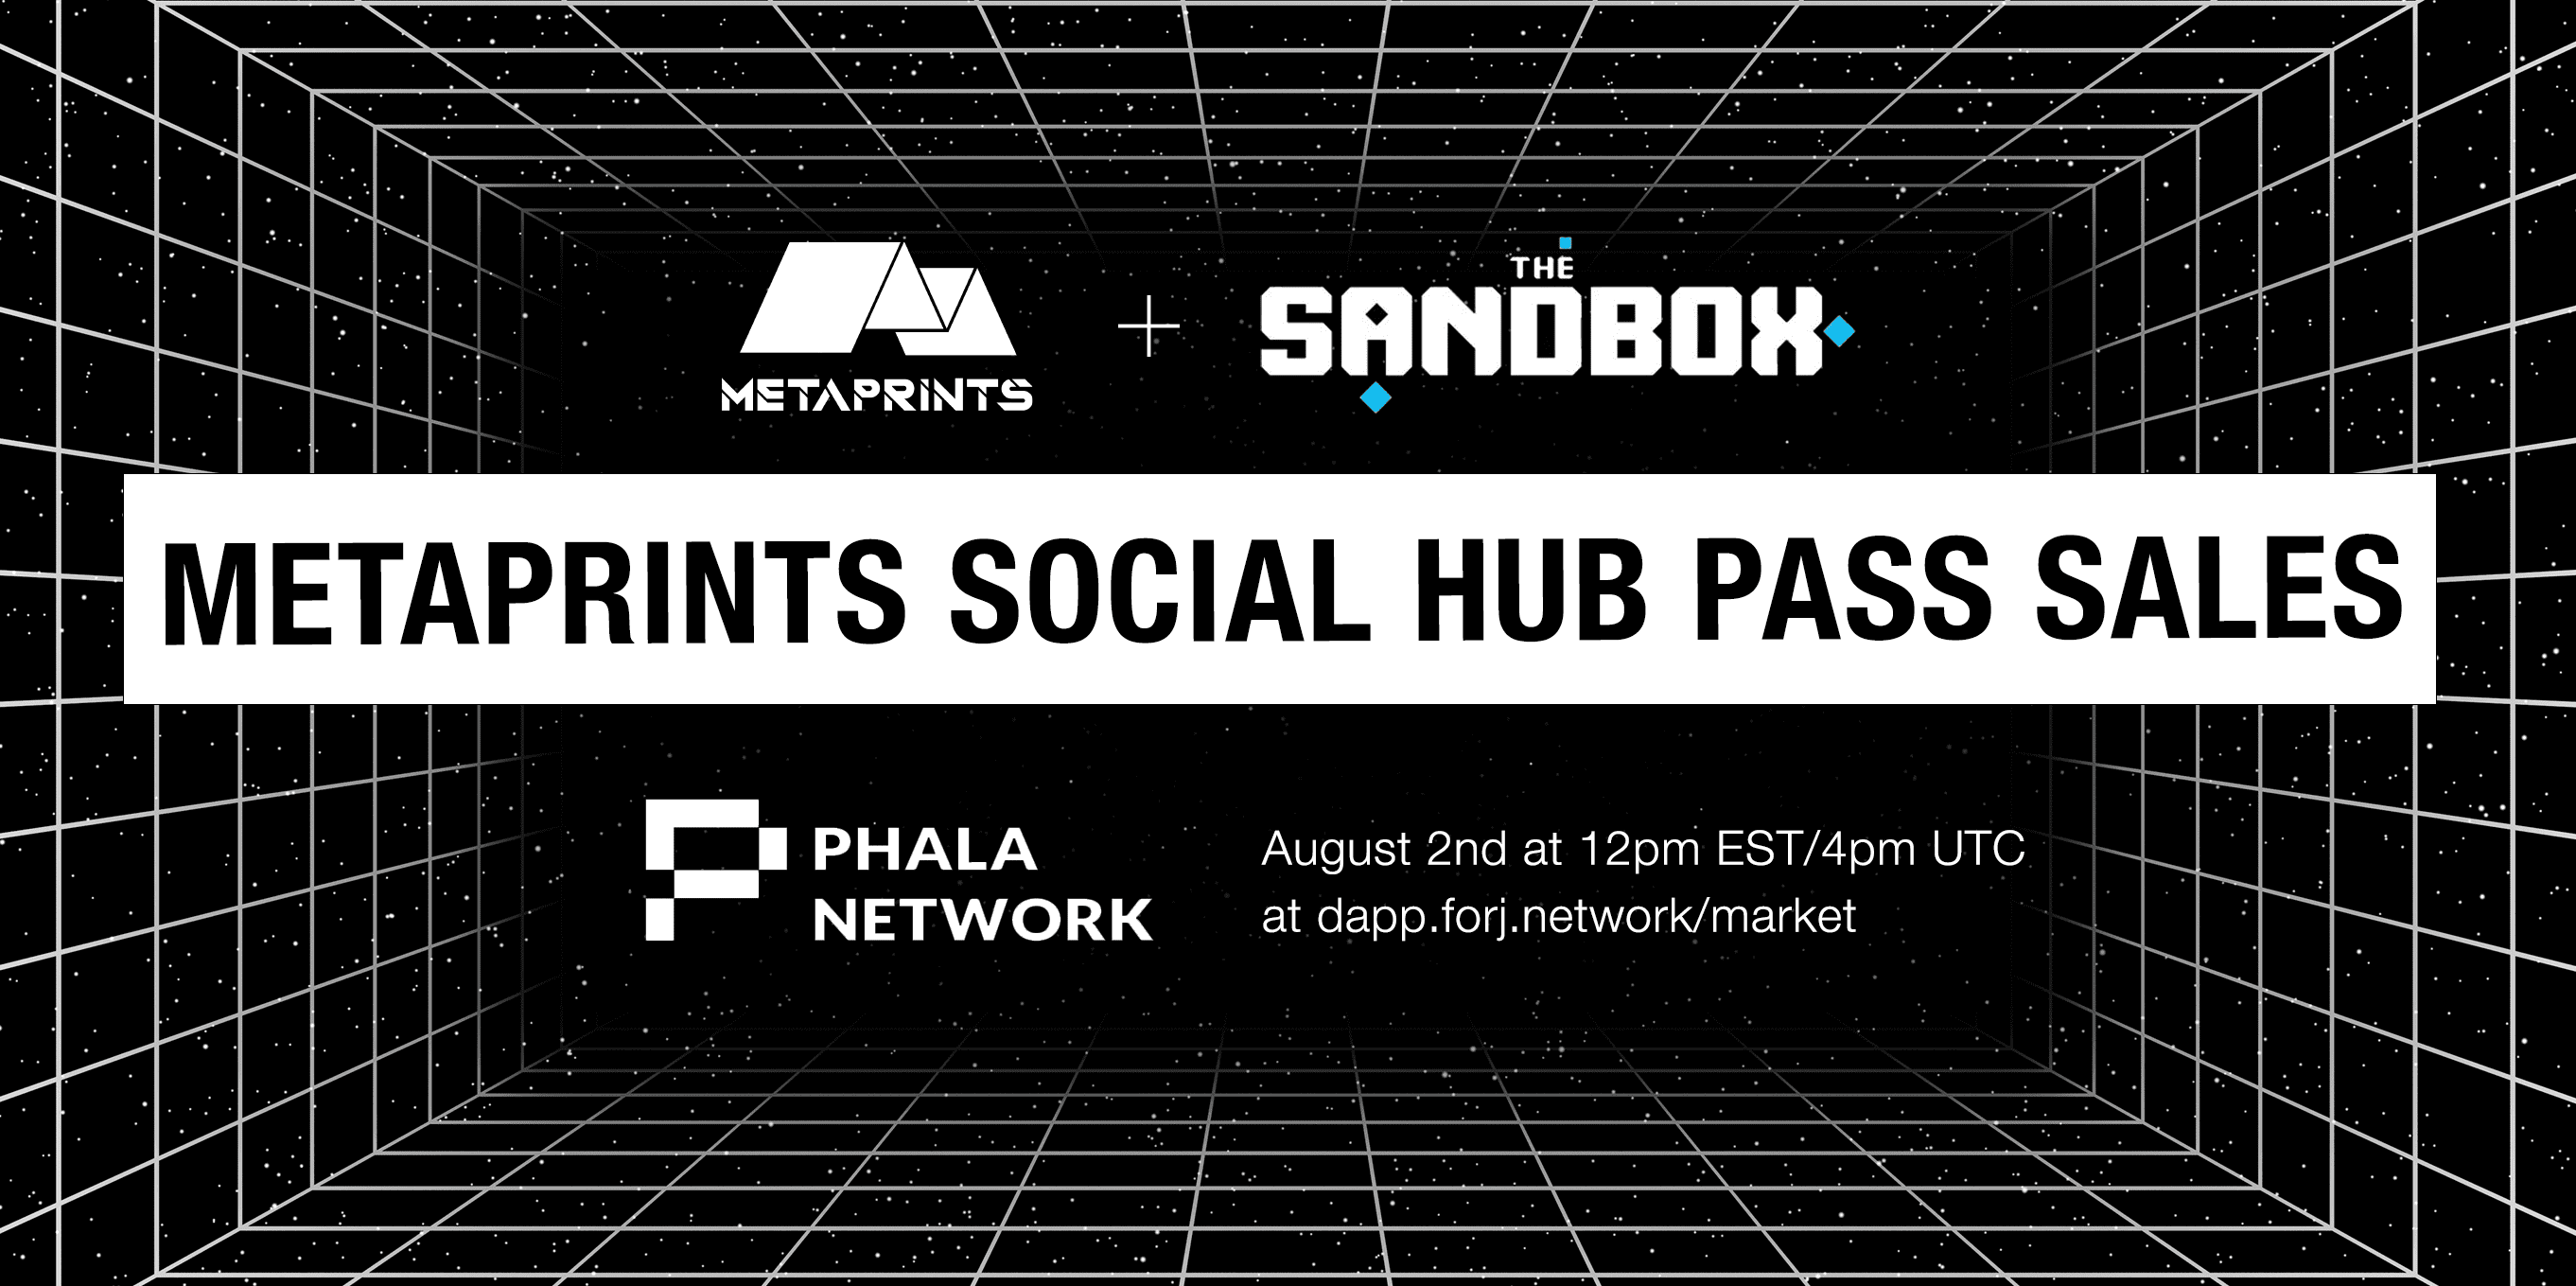 Introducing our Fifth Social Hub Pass Sale, Starting August 2nd with Phala